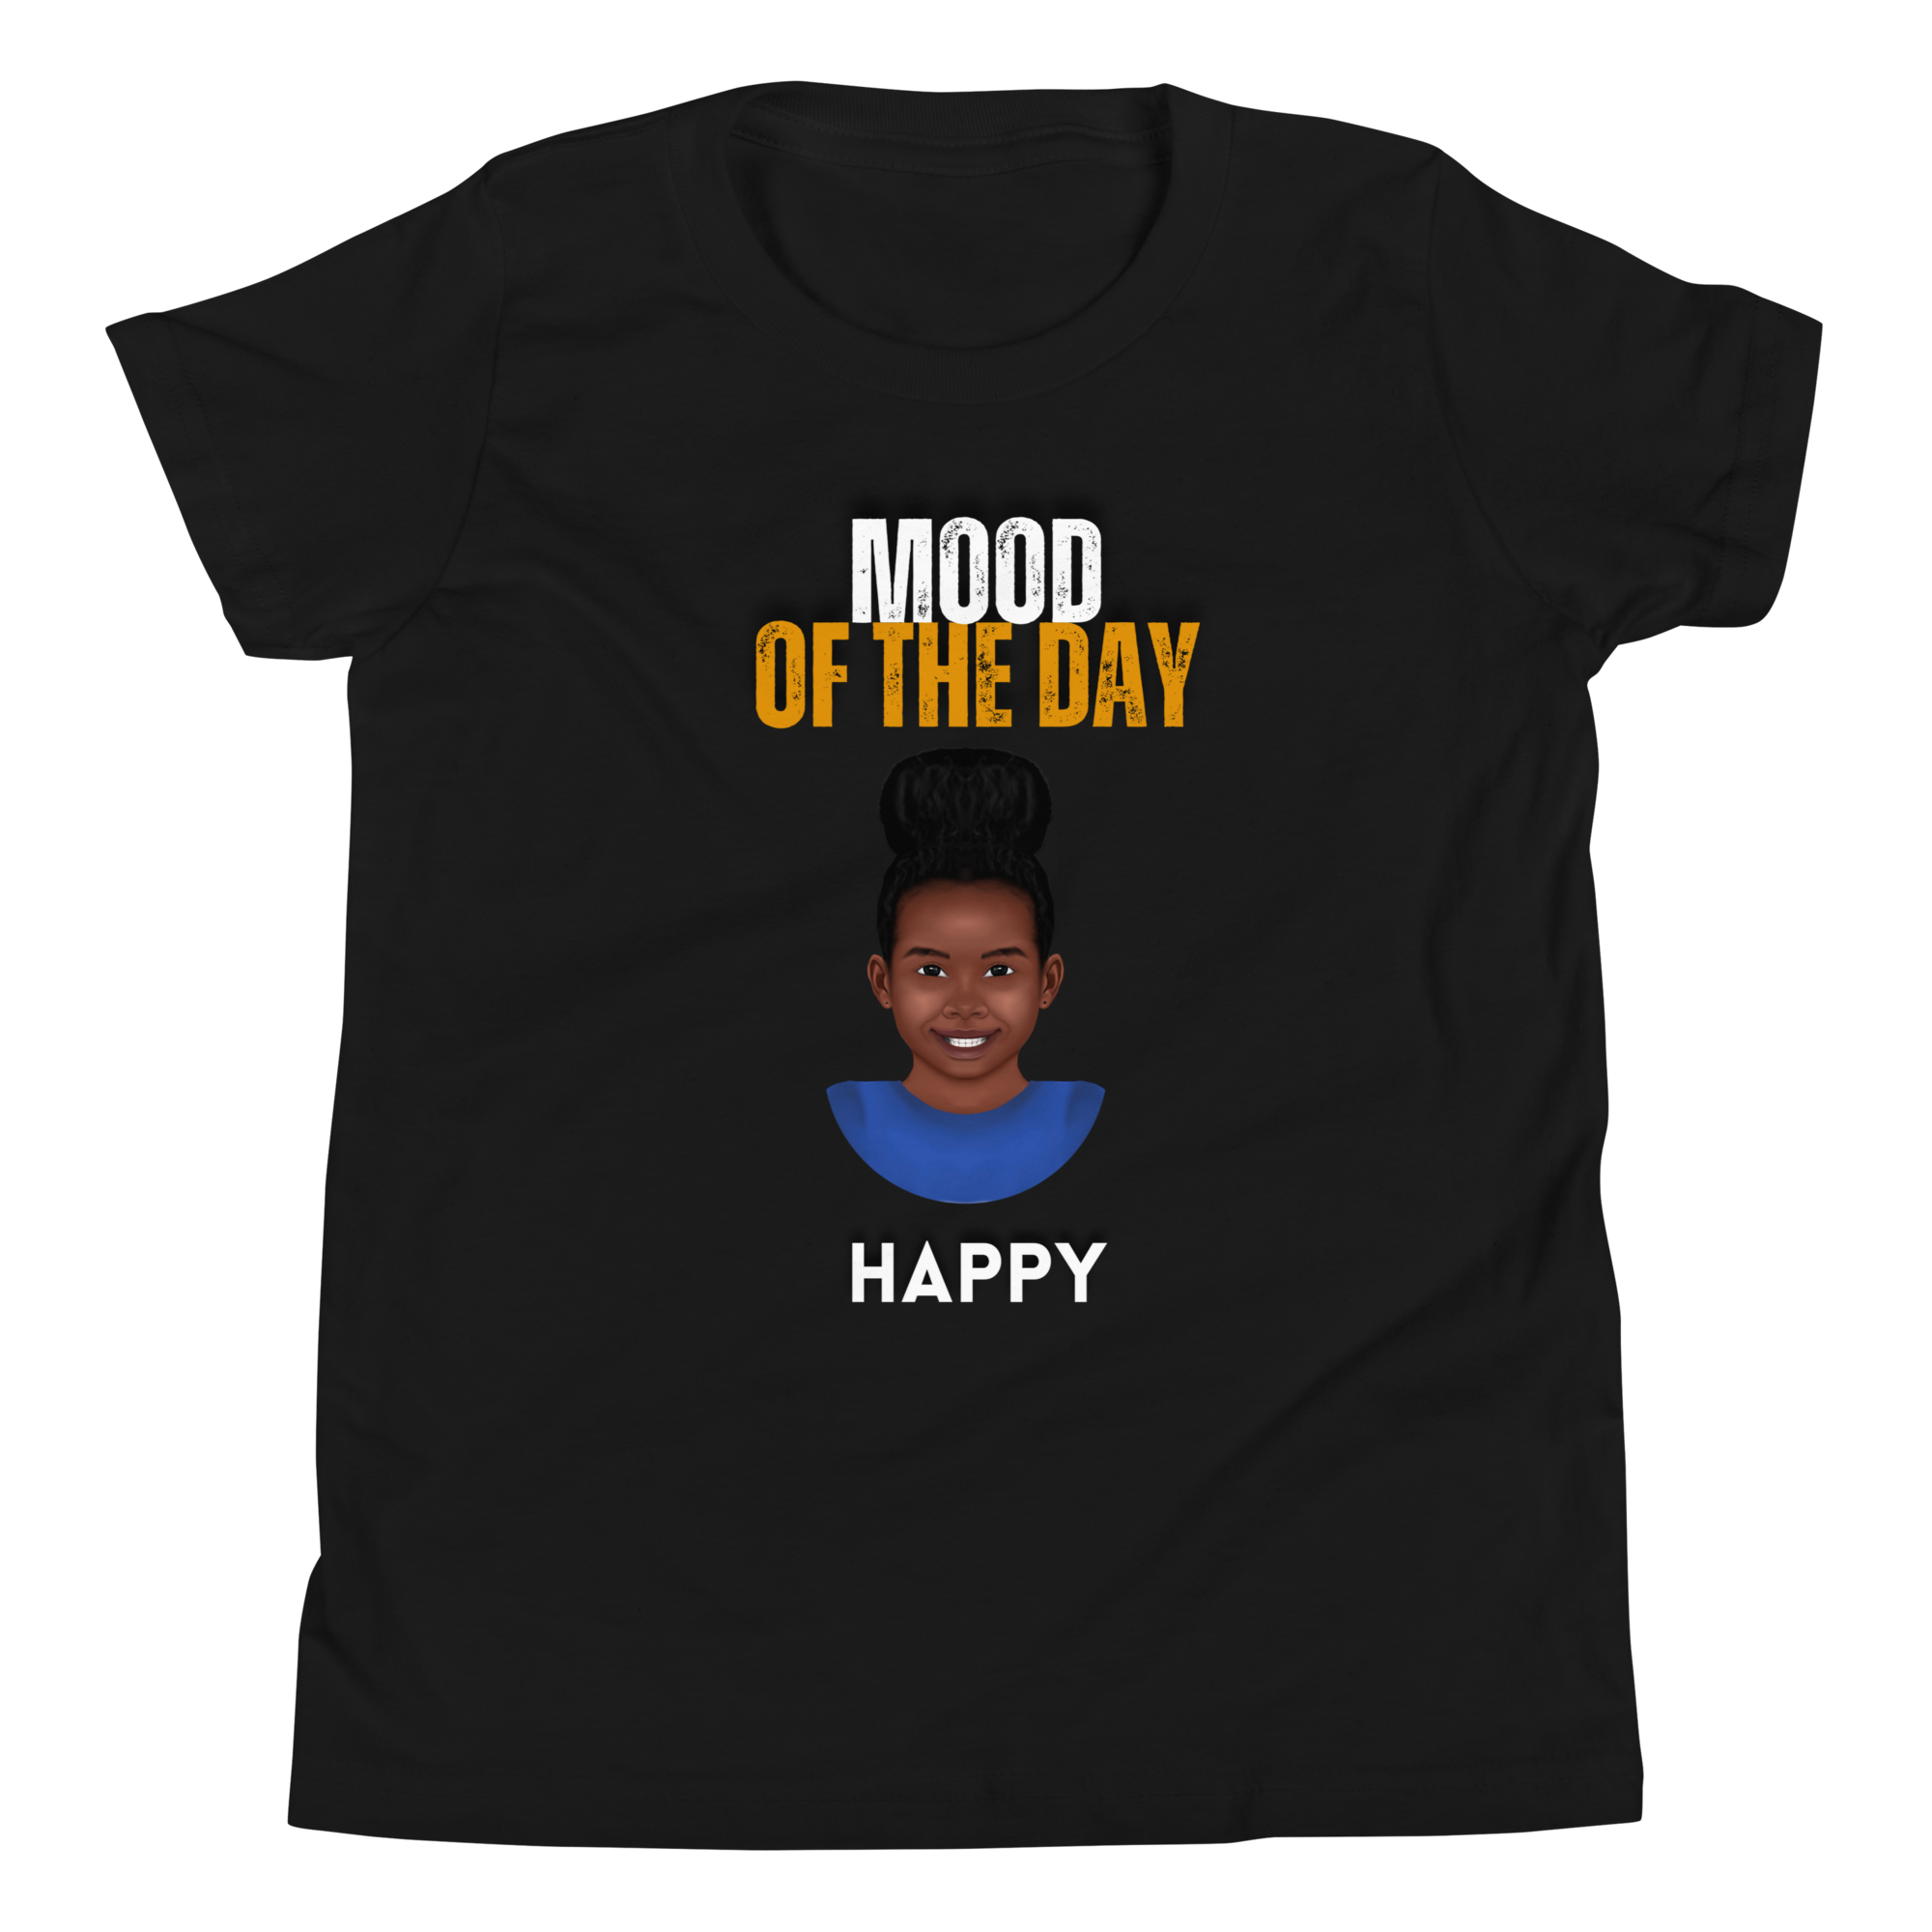 Youth Mood of the Day T-shirt - Happy Girl